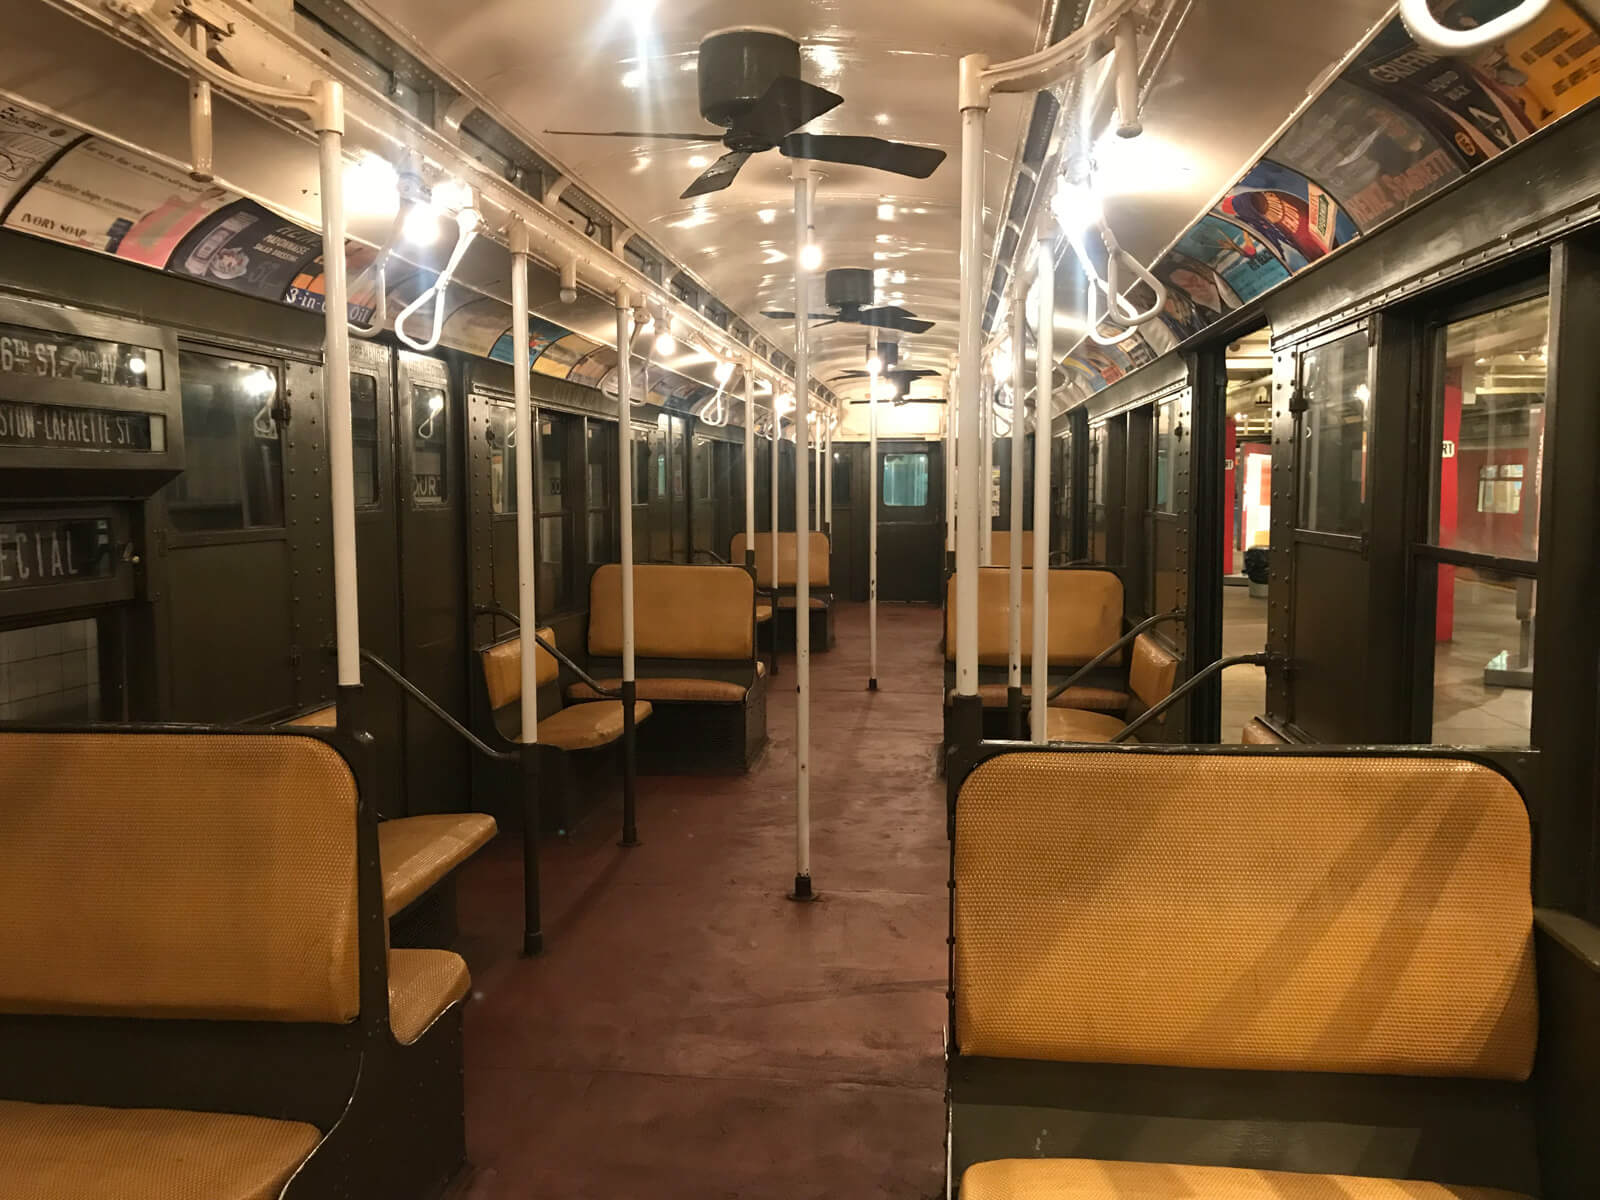 The inside of an old train carriage, with seats that have cushions covered in plastic straw